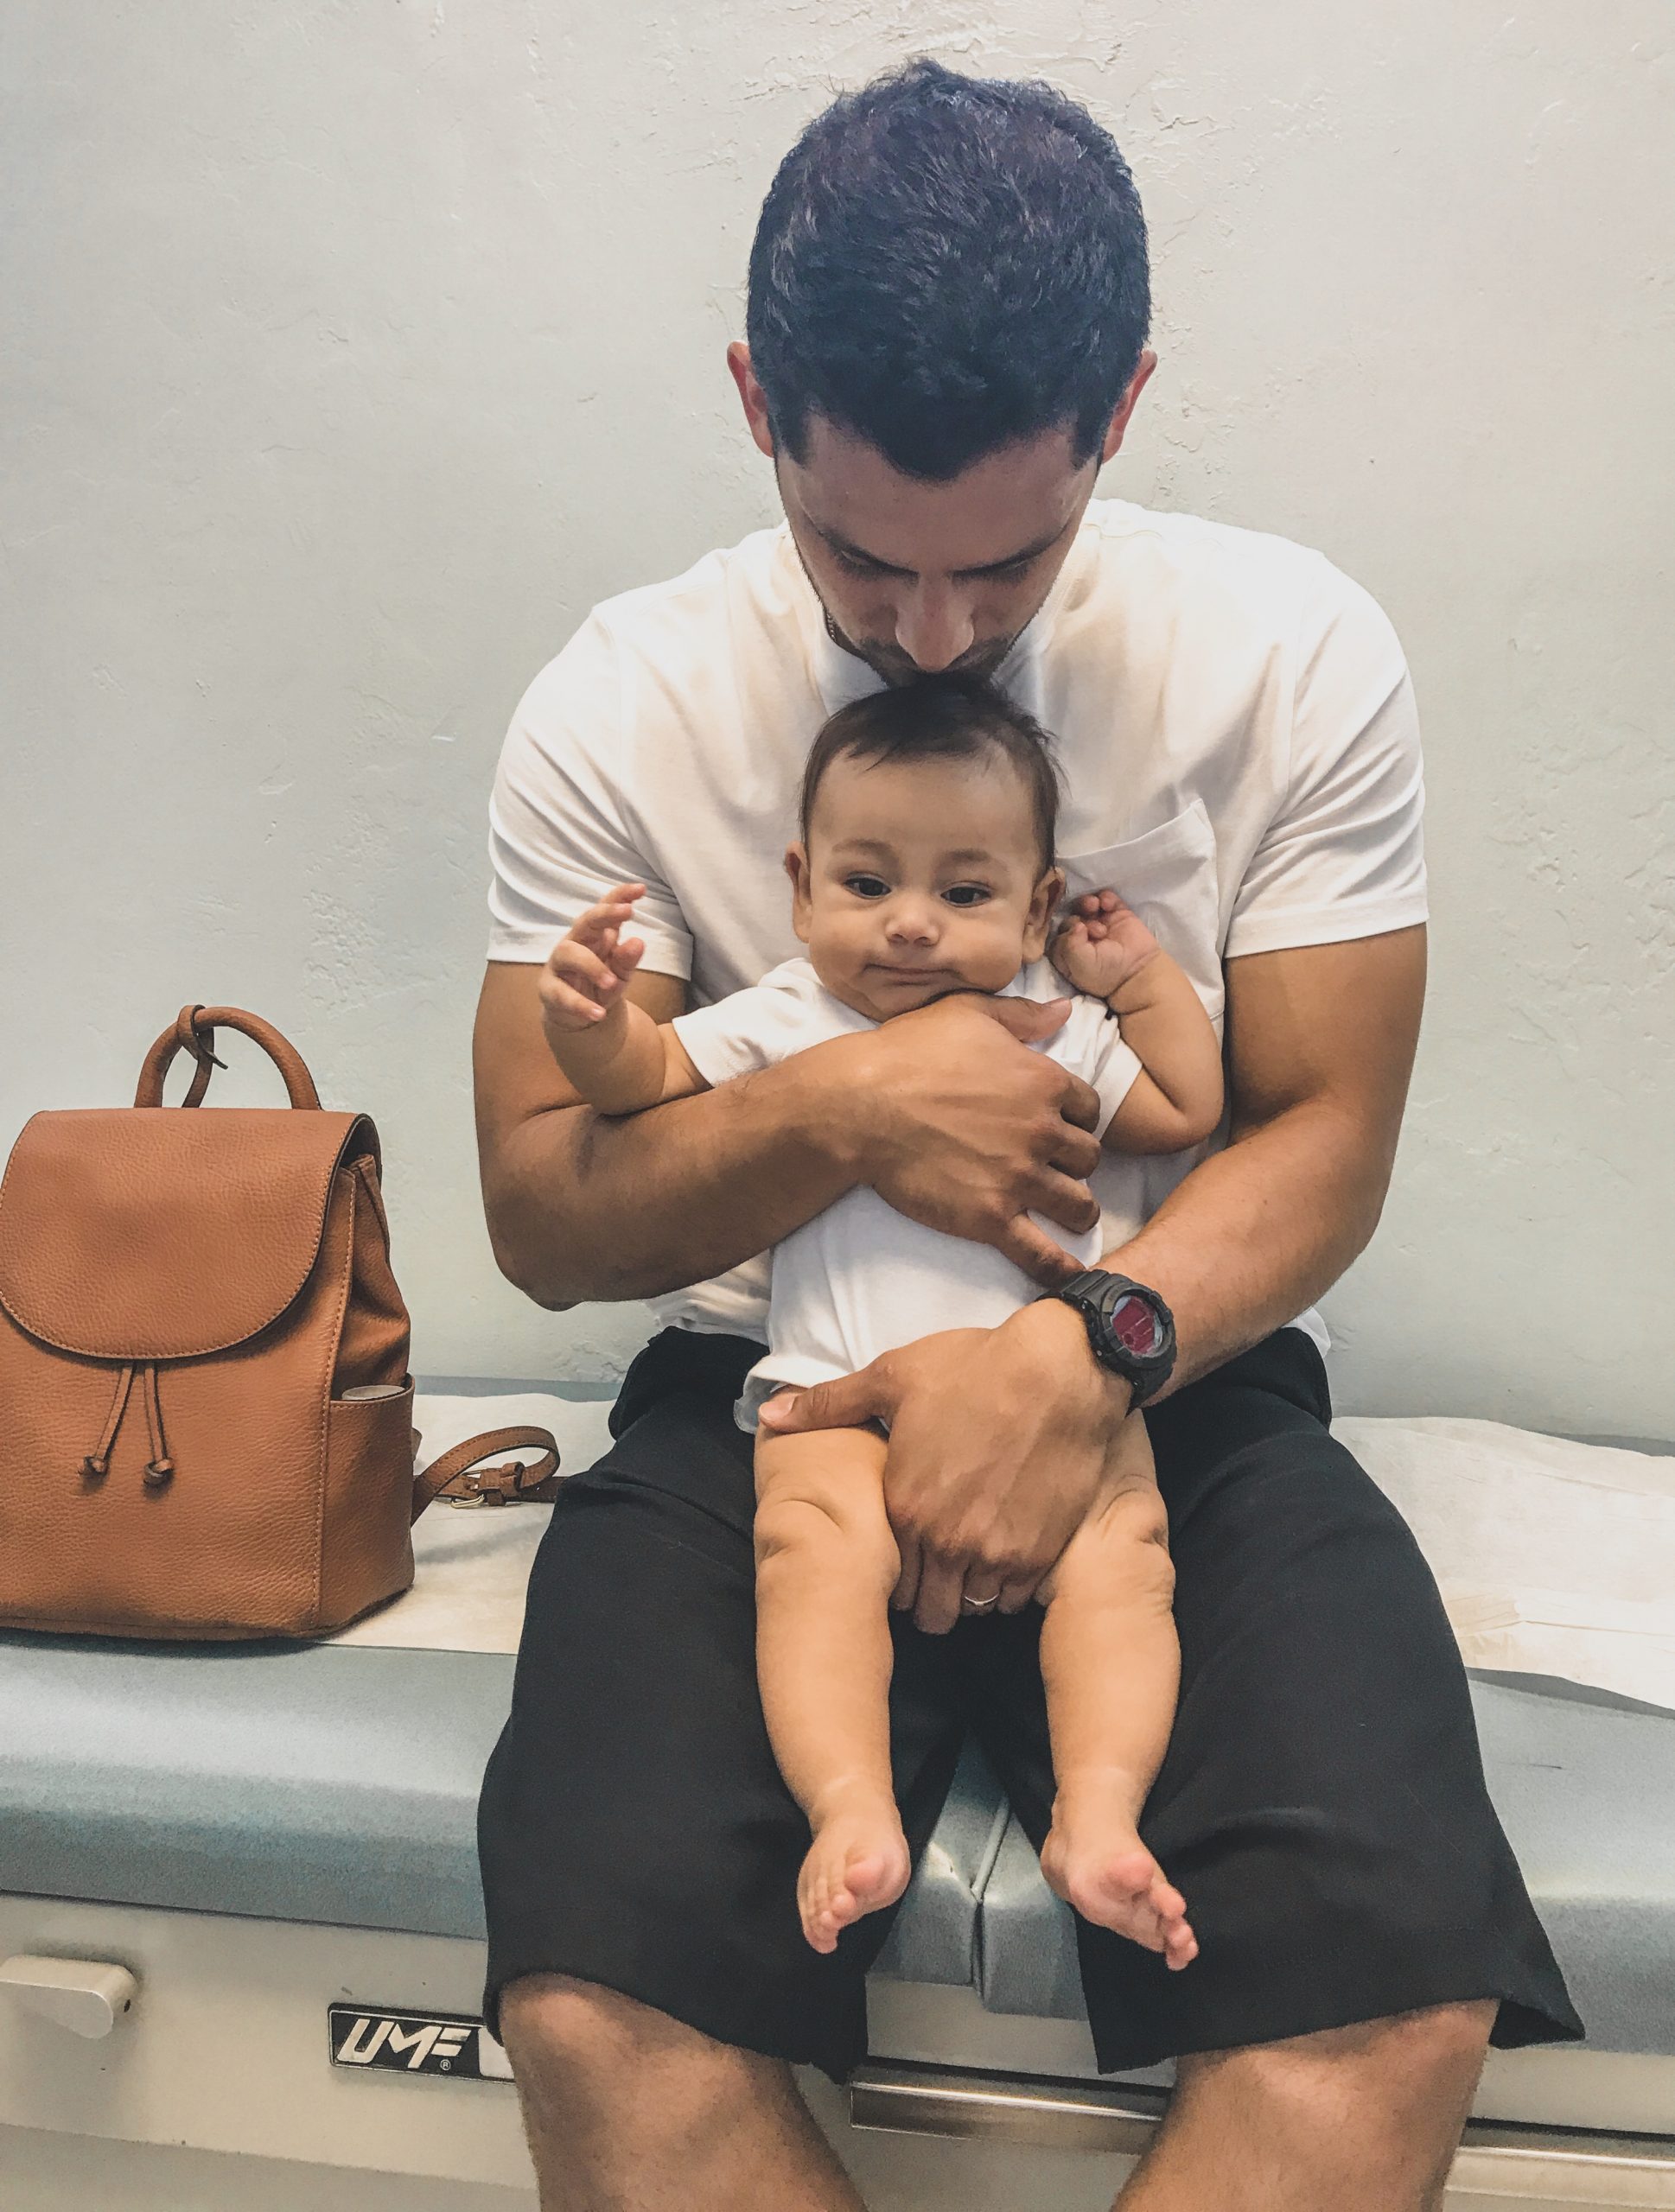 baby being held by father in doctors office getting first vaccines